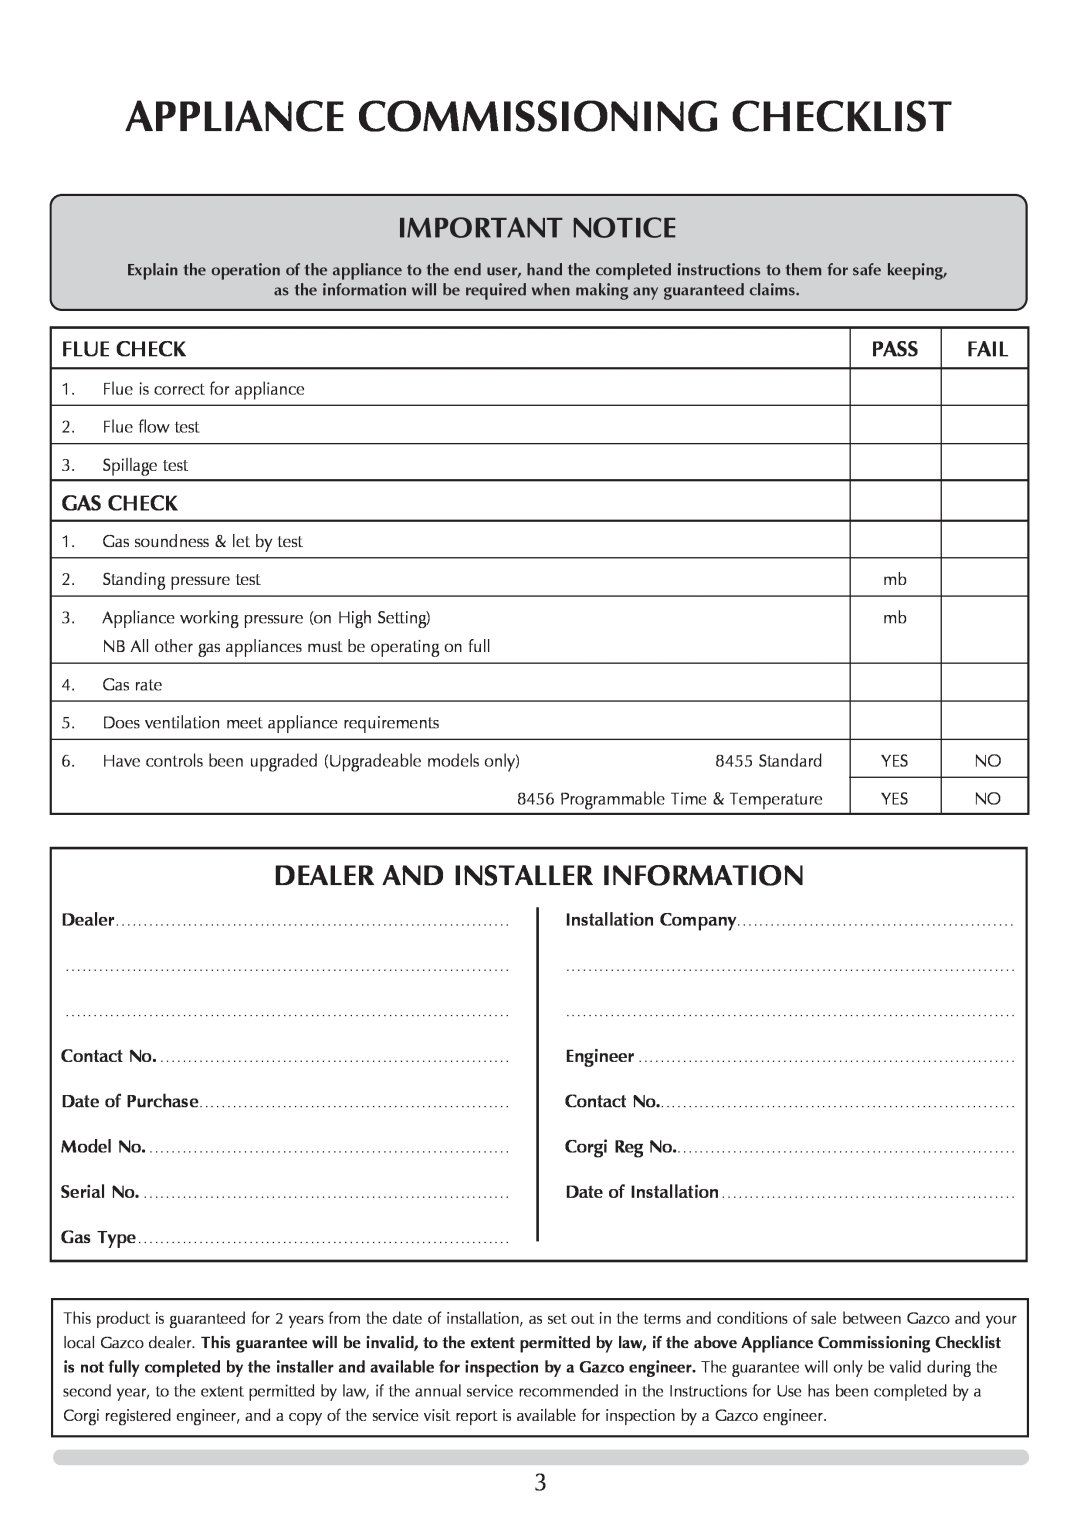 Stovax 705088 Appliance Commissioning Checklist, Important Notice, Dealer And Installer Information, Flue Check, Pass 